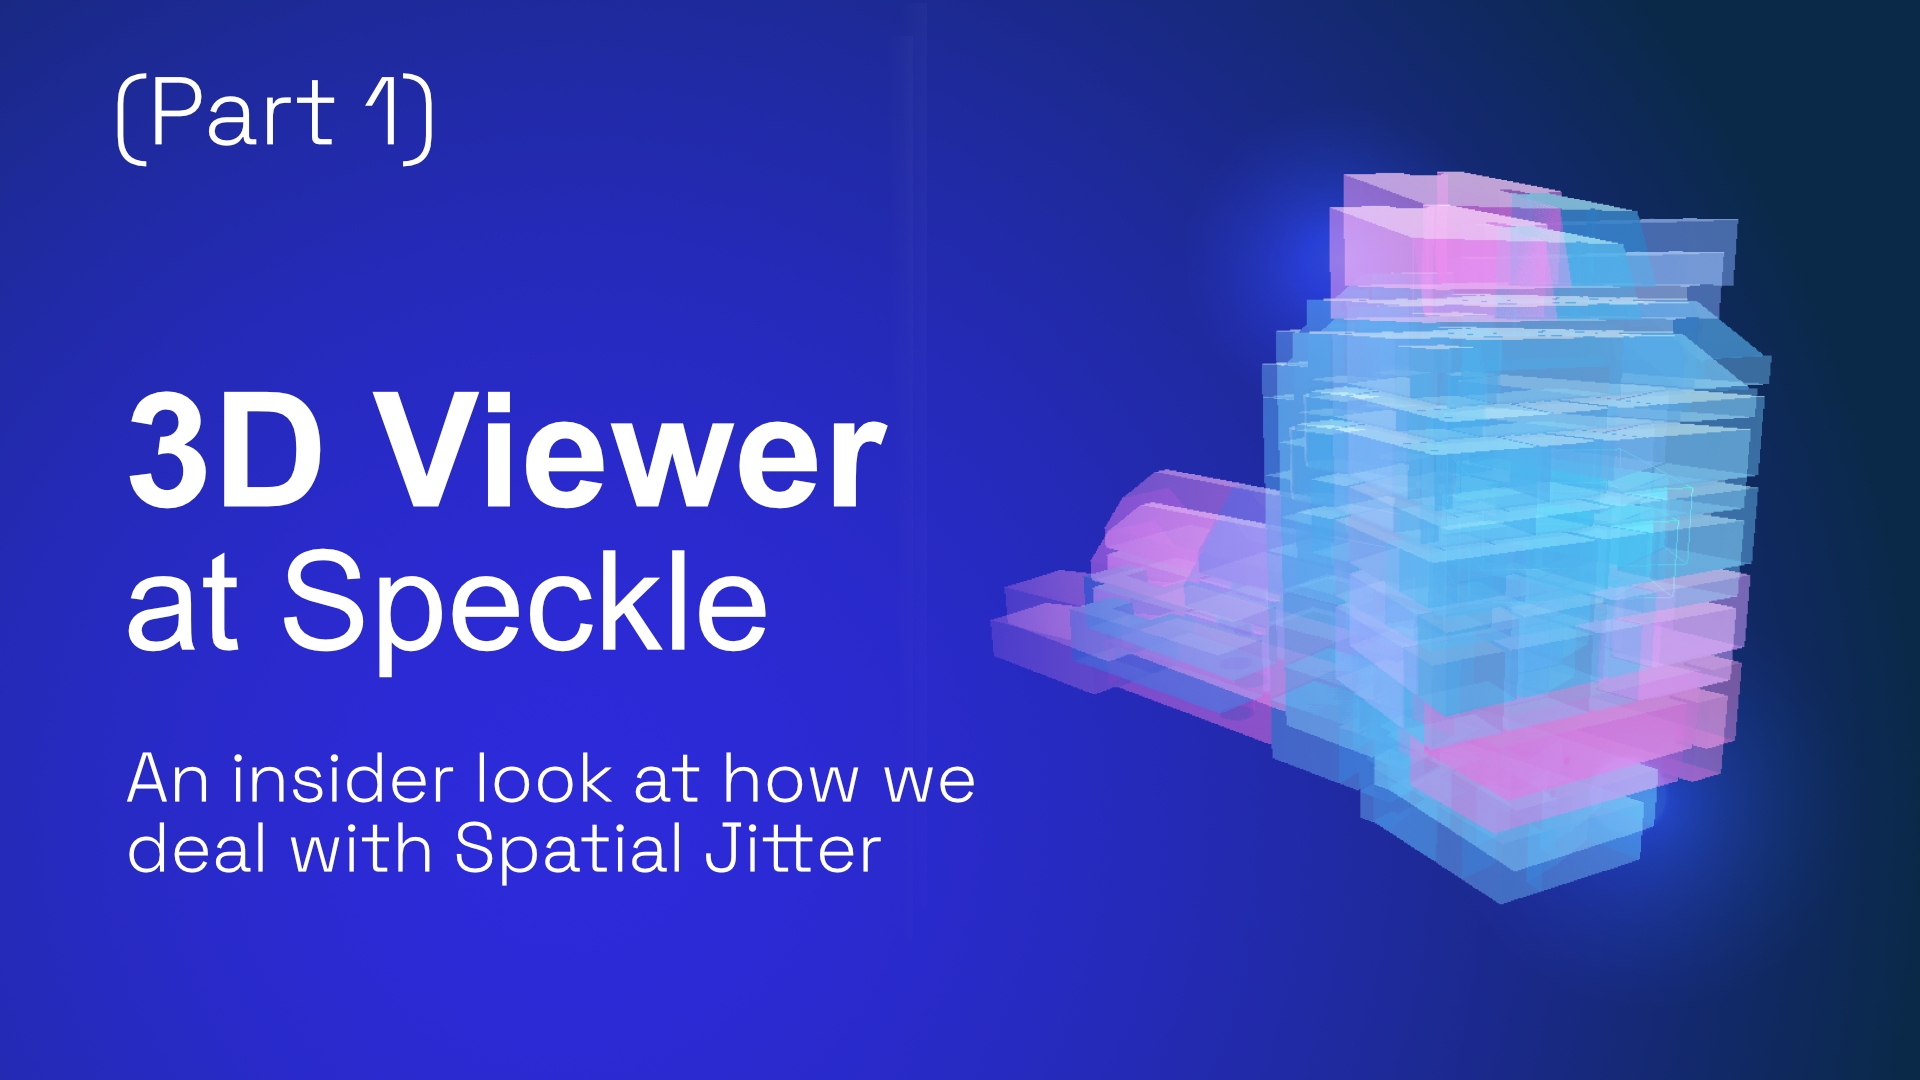 Rendering Dimensionally Large 3D Models in The Browser: Speckle’s Take On Spatial Jitter